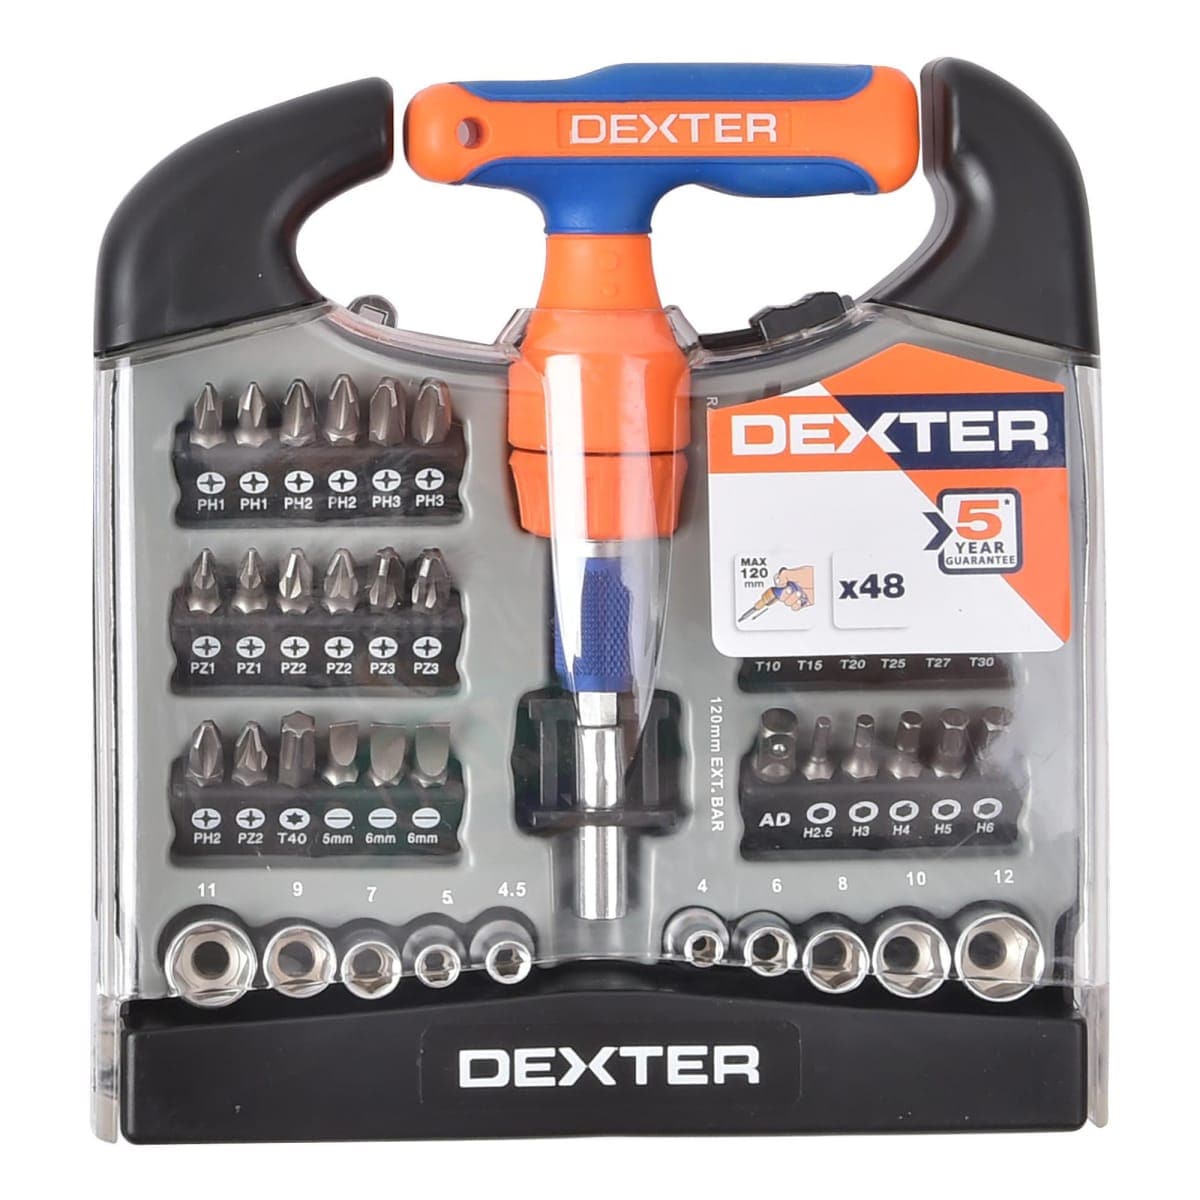 DEXTER T-SCREWDRIVER WITH BITS AND SOCKETS 48 PIECES - best price from Maltashopper.com BR400001555